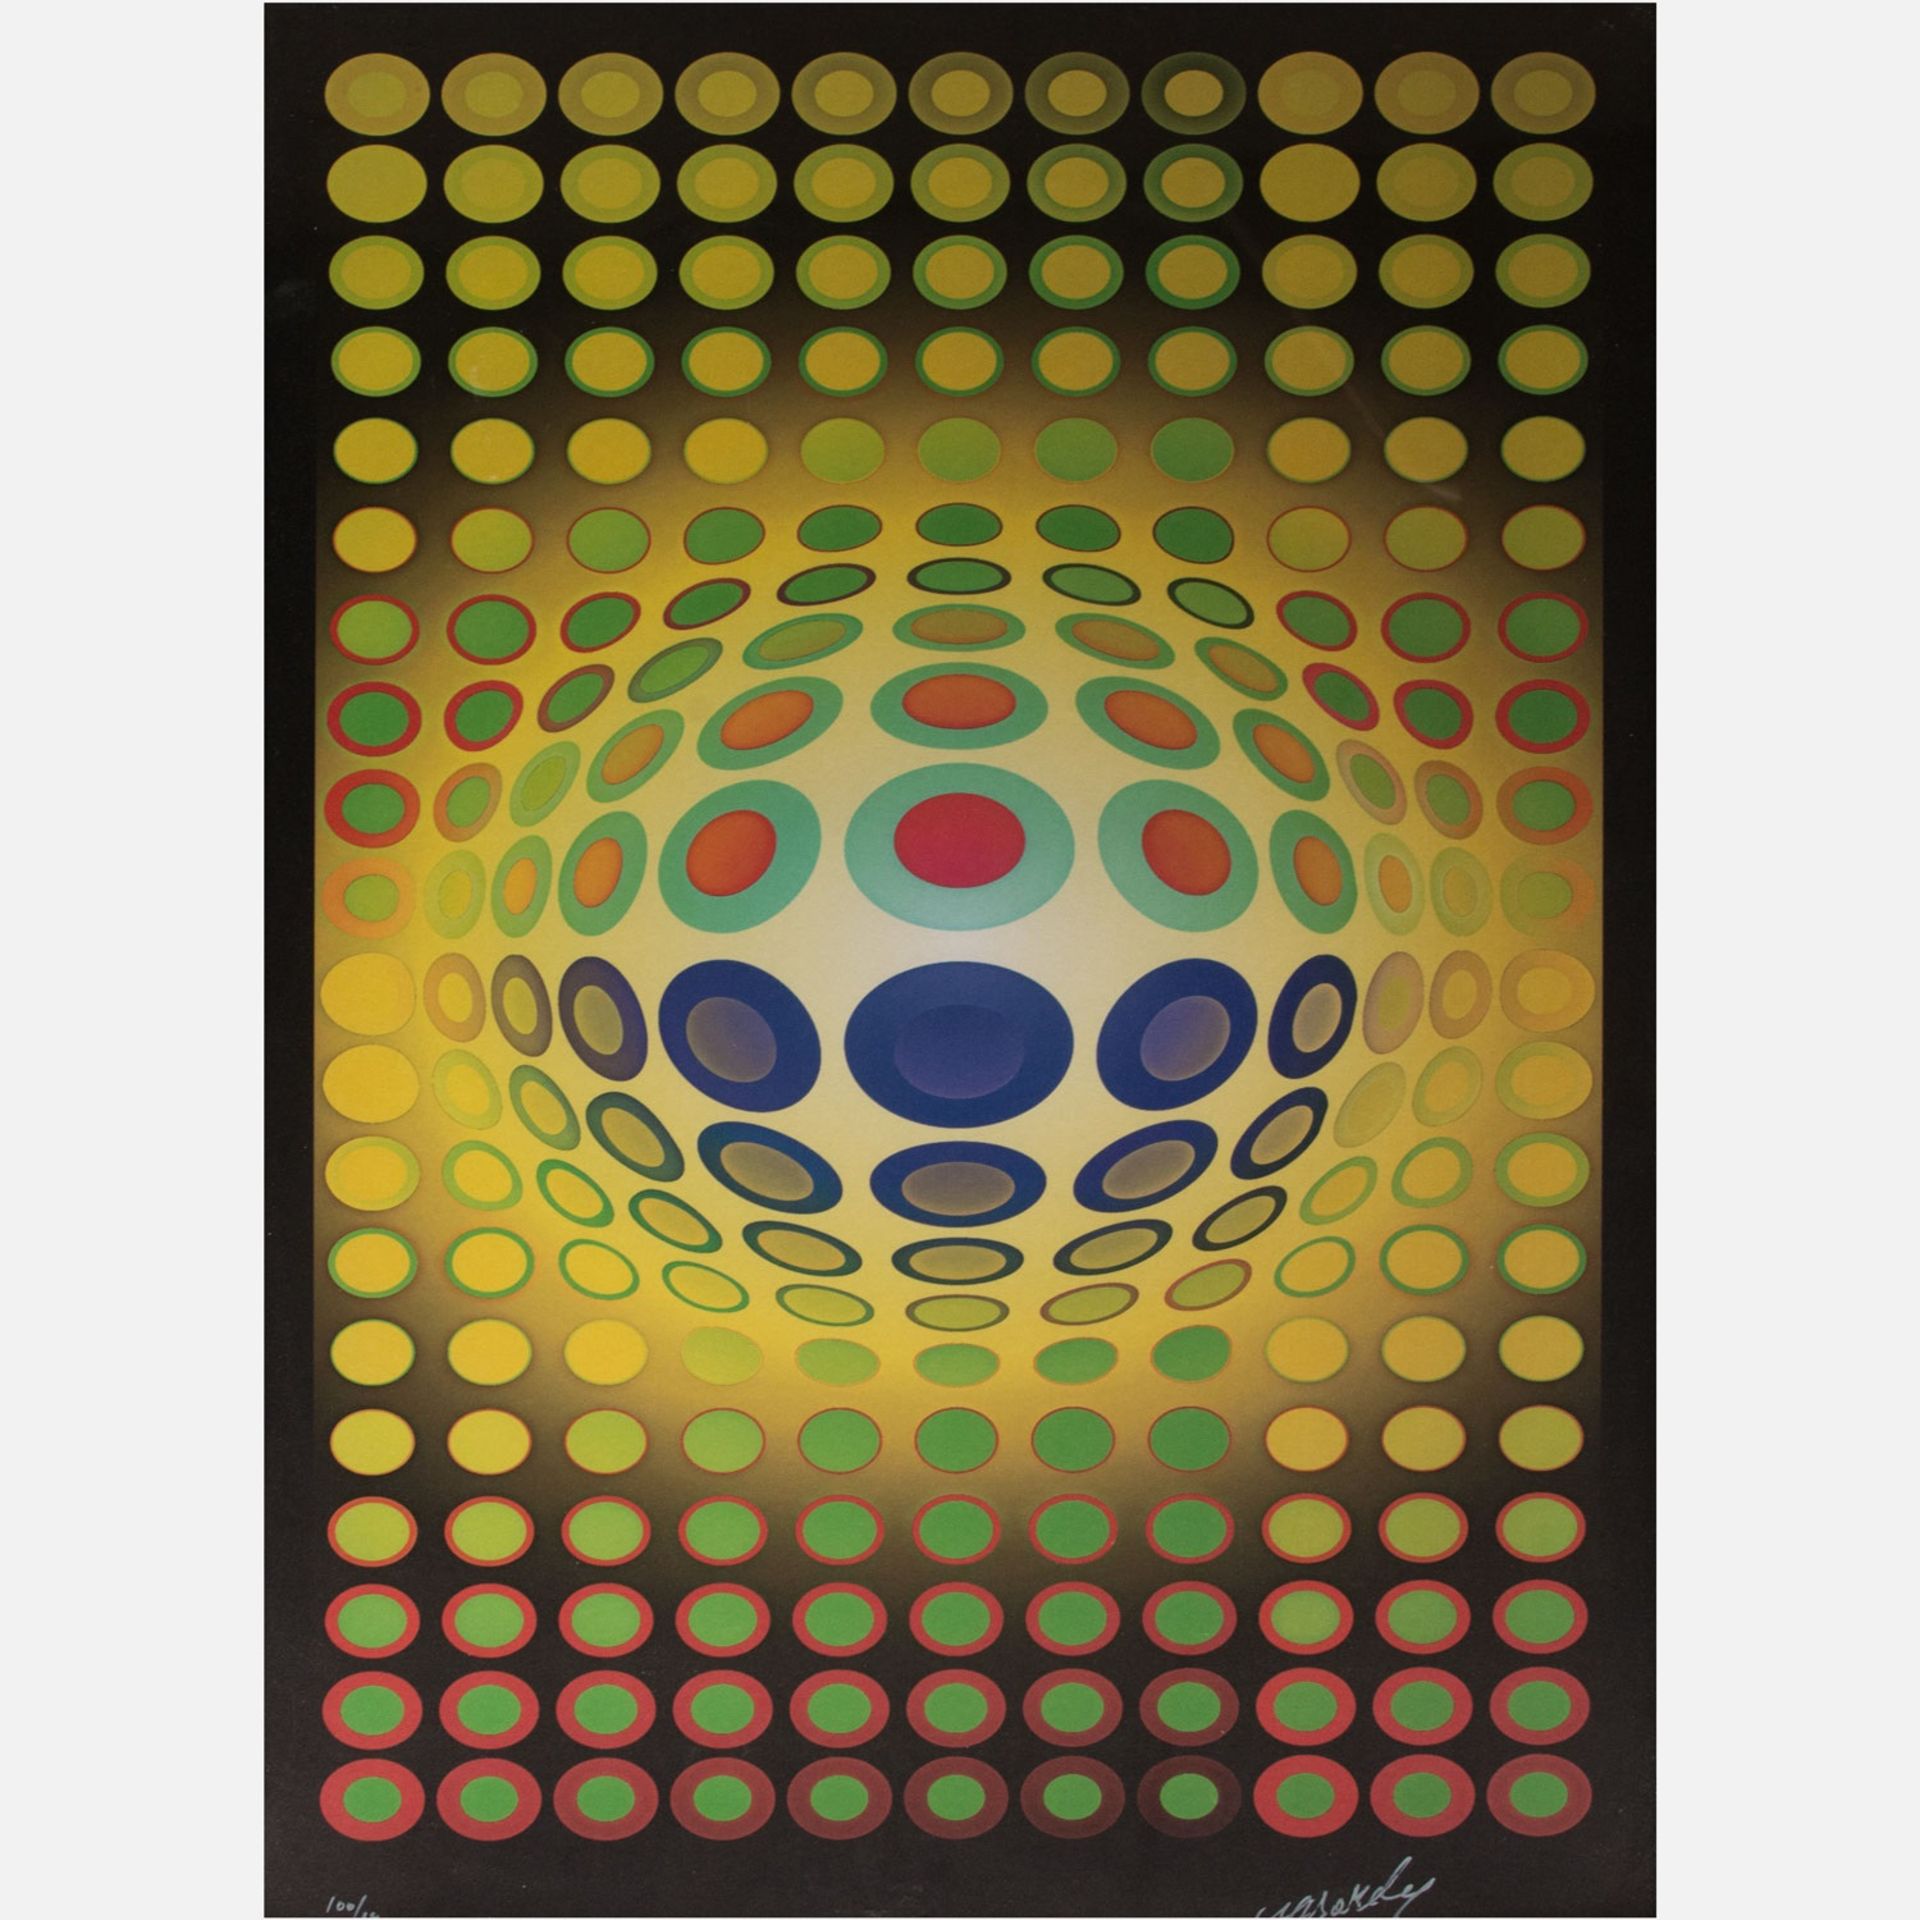 Victor Vasarely (1906-1997) - Graphic - Image 2 of 3